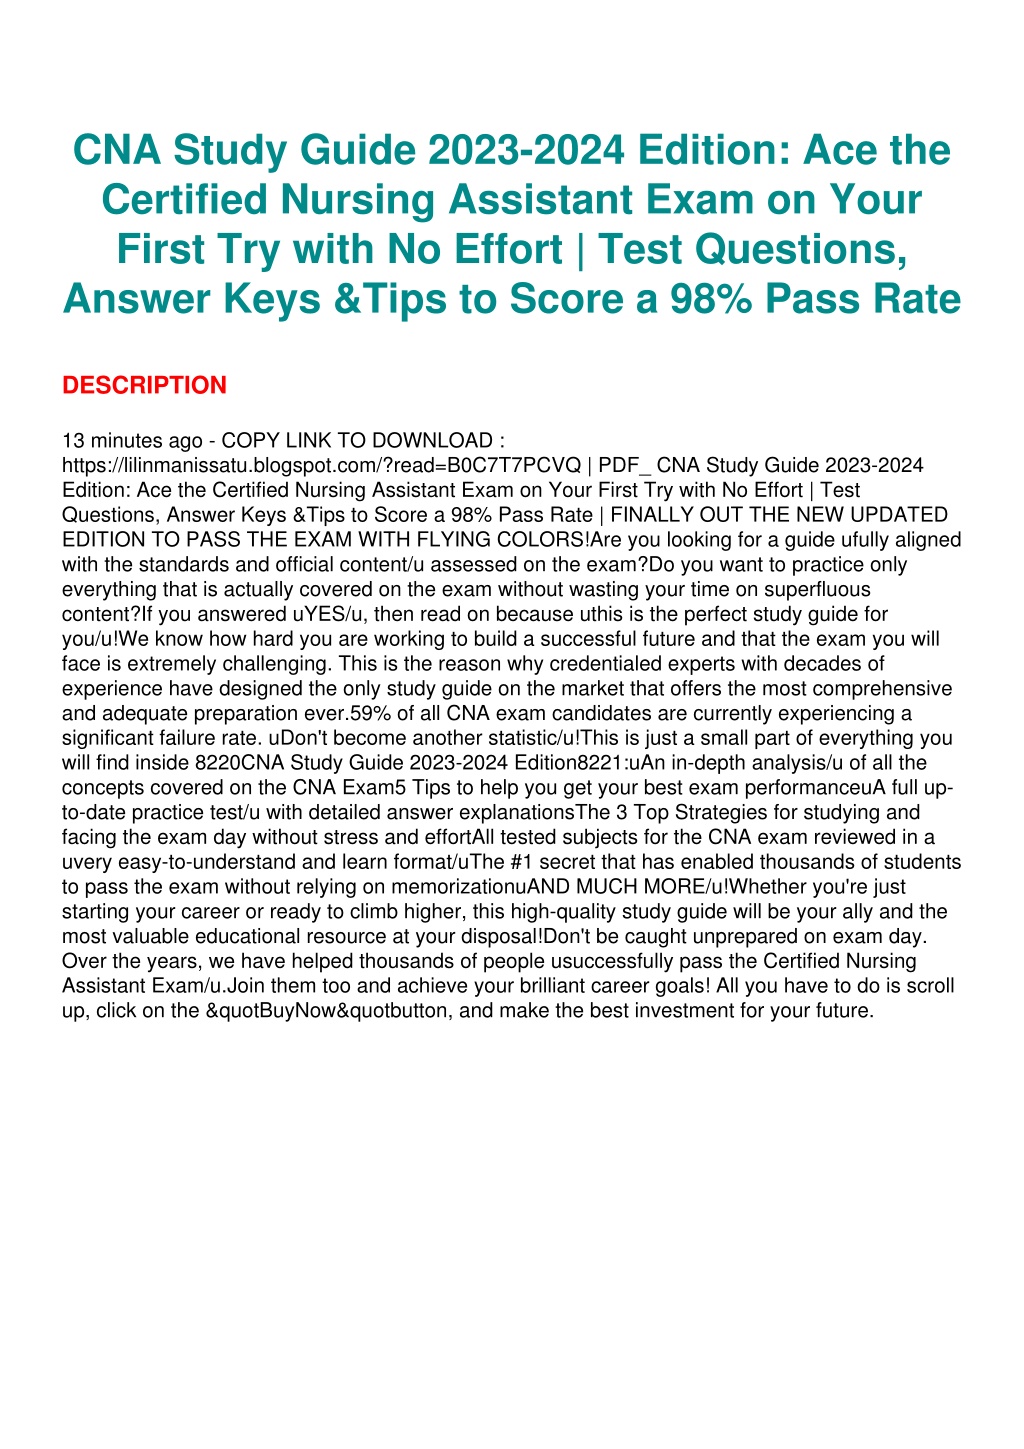 PPT PDF KINDLE DOWNLOAD CNA Study Guide 20232024 Edition Ace the